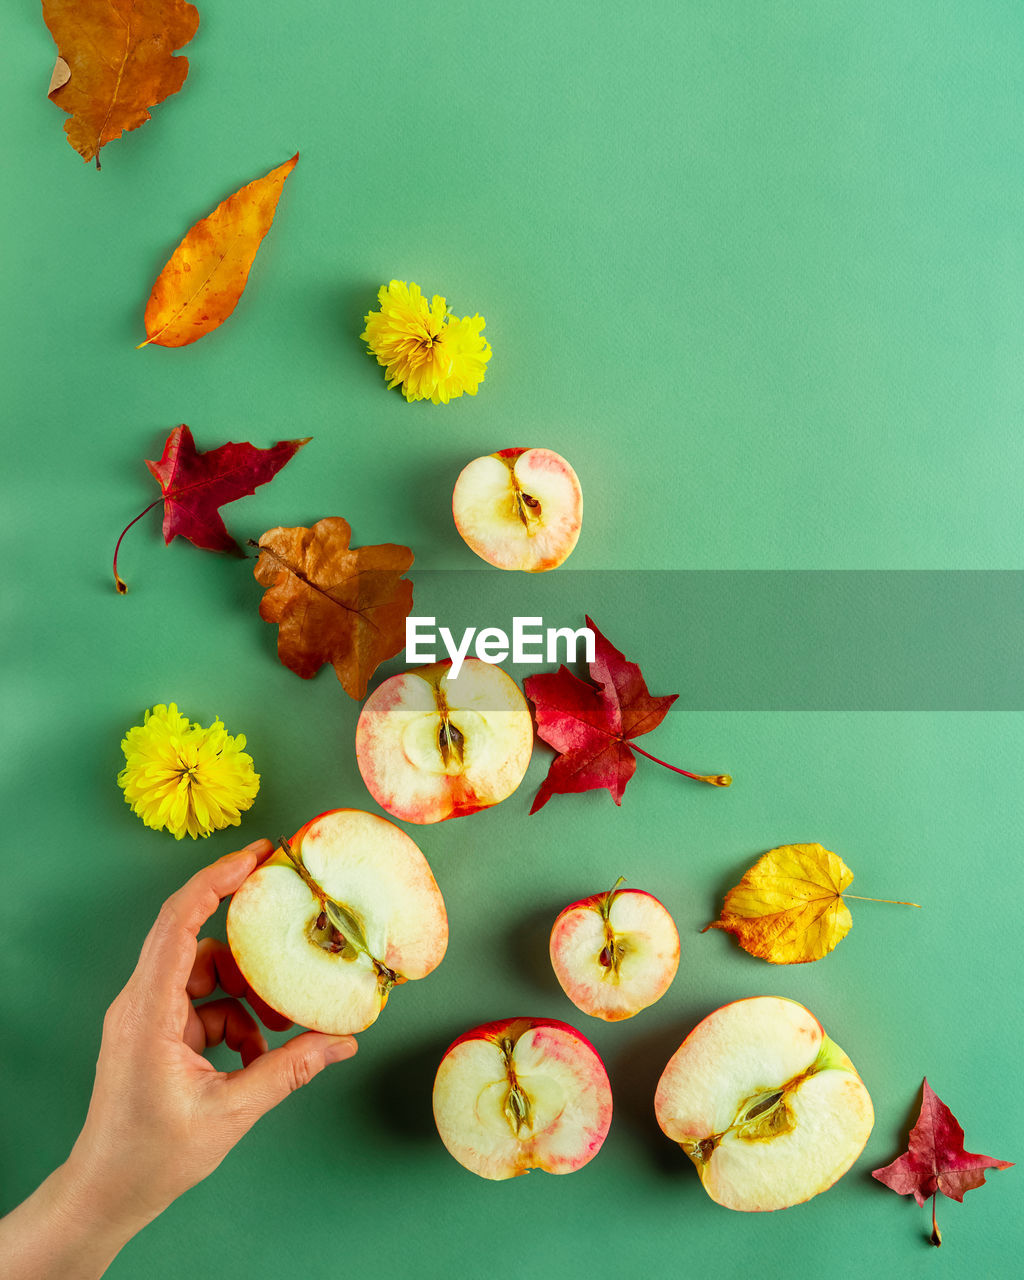 Flat layout of fresh apples, autumn leaves and human hand holding apple on vibrant green background 